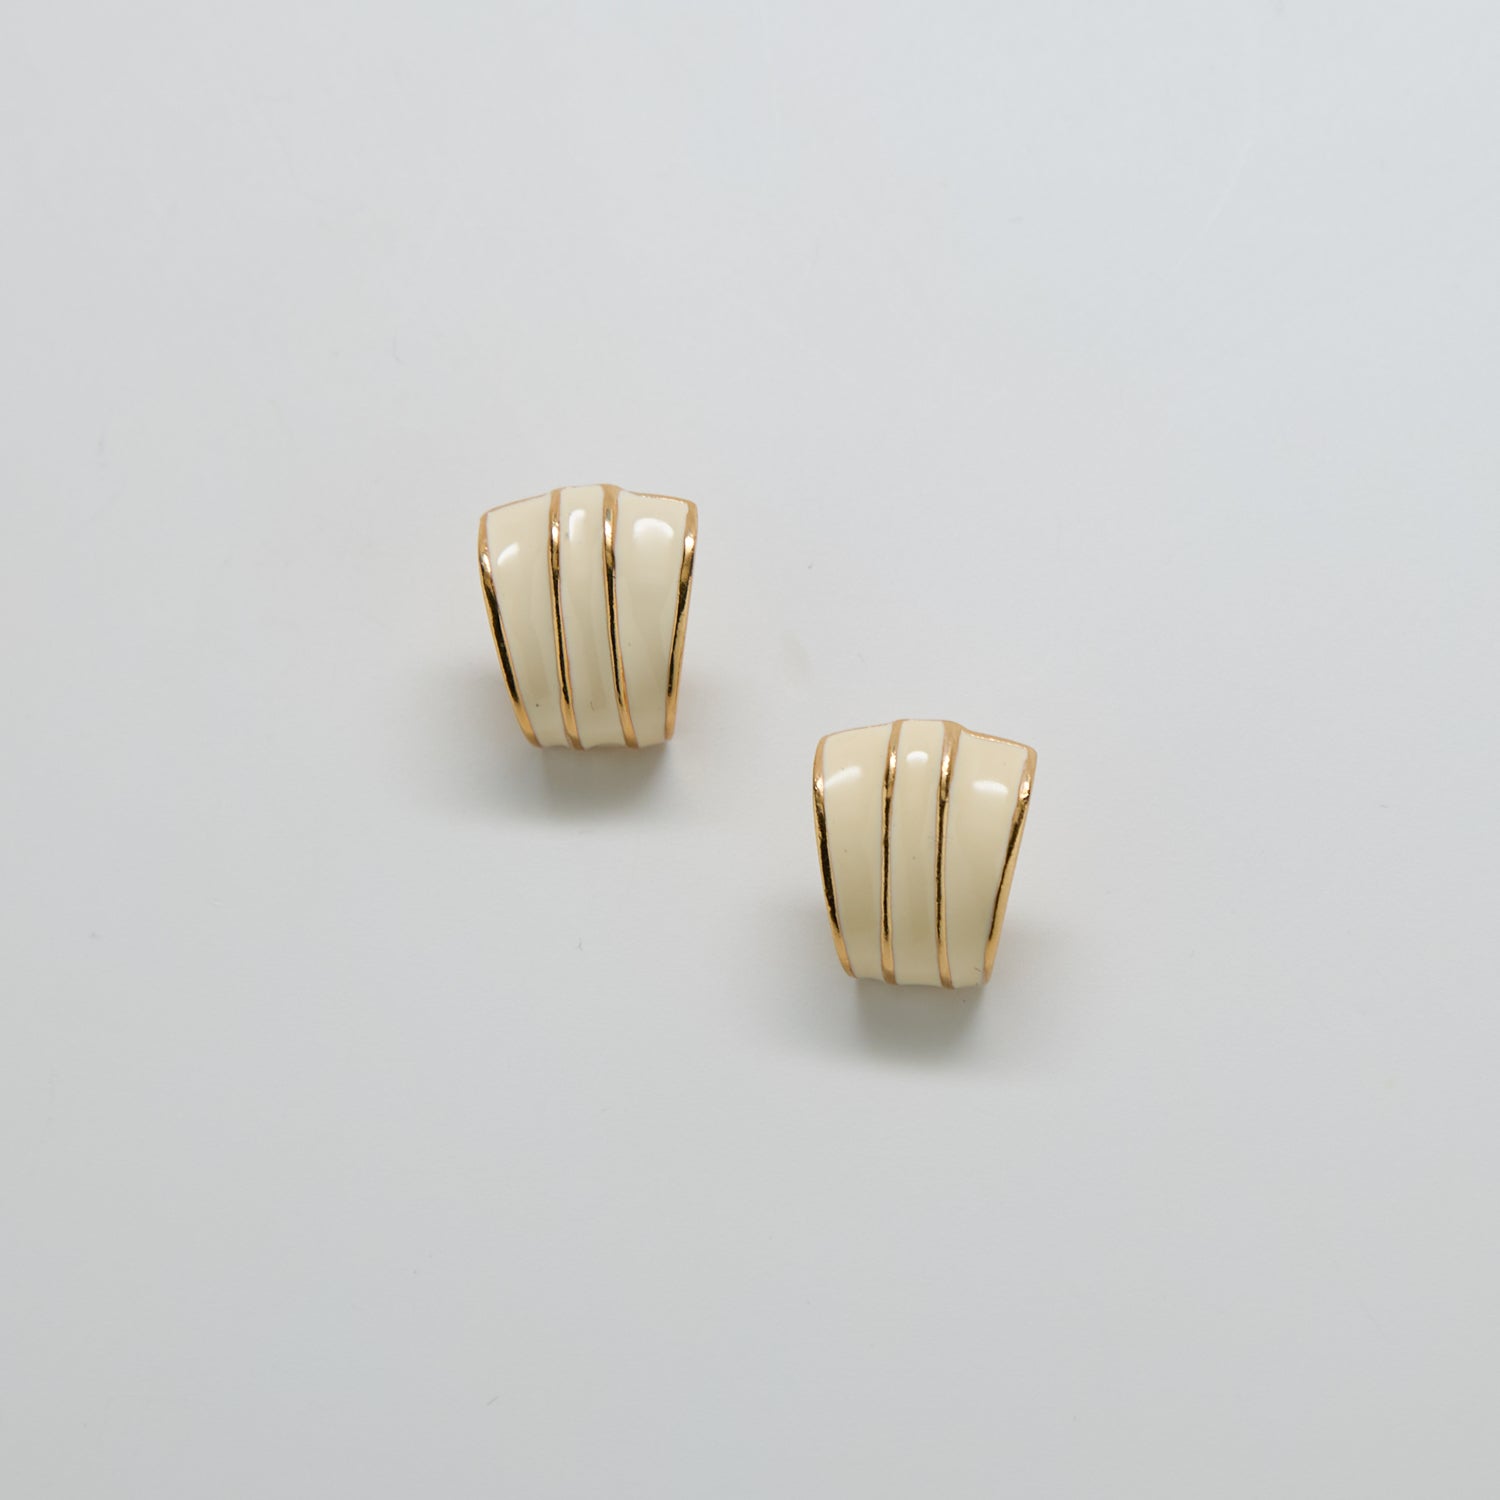 Vintage Gold and White Stripe Earrings